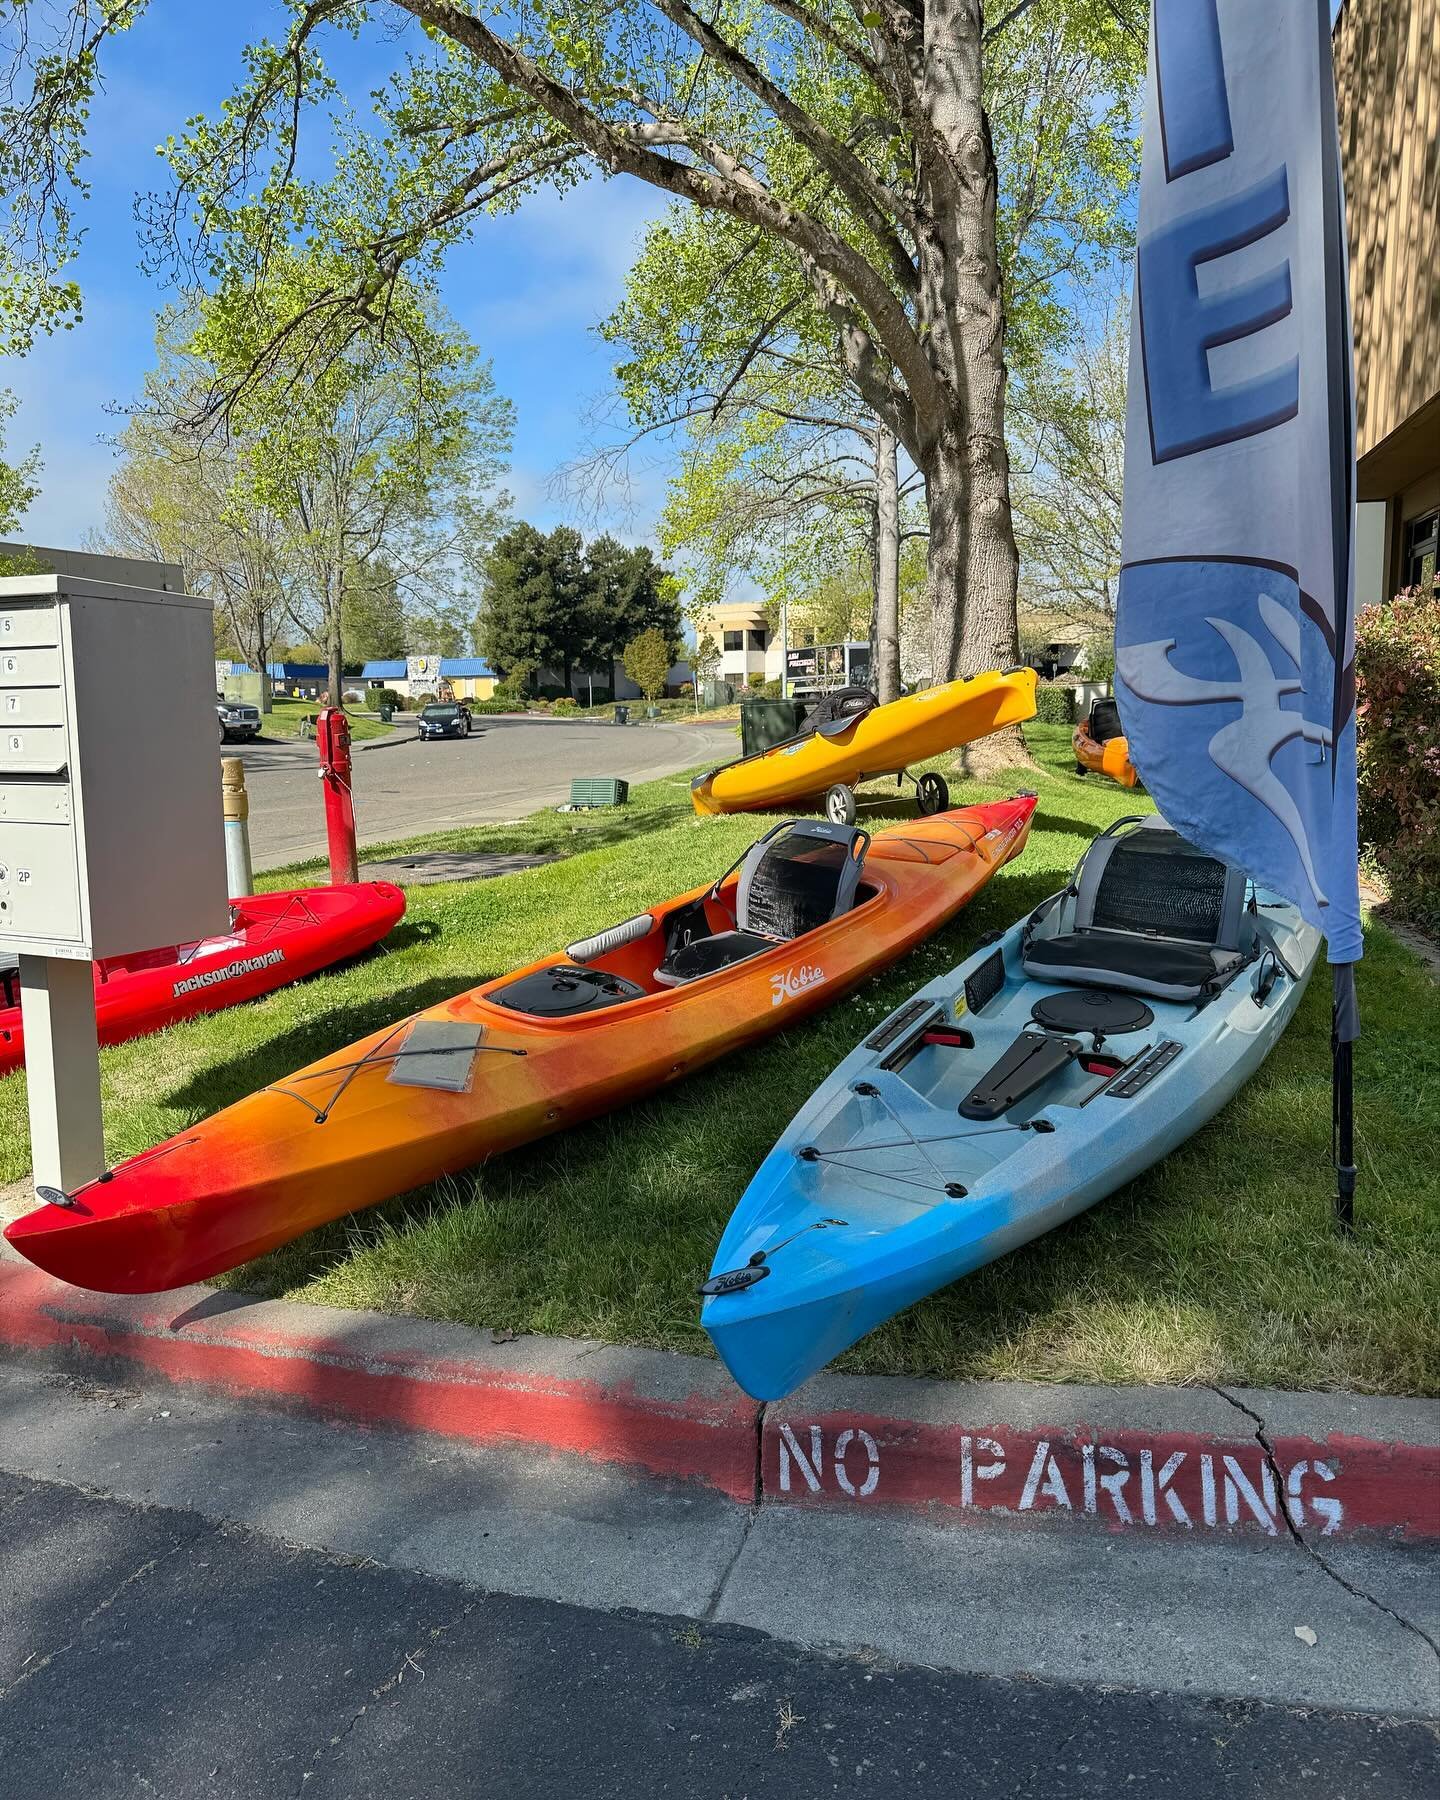 The paddling Kayaks are out on the lawn today. Swing by the shop and have a seat in one. 

#hobie #hobiekayaks #jacksonkayak #jacksonkayaks #kayak #kayaks #kayaking #kayaking🚣 #kayakstore #smallbusiness #localbusiness #getoutside #spring